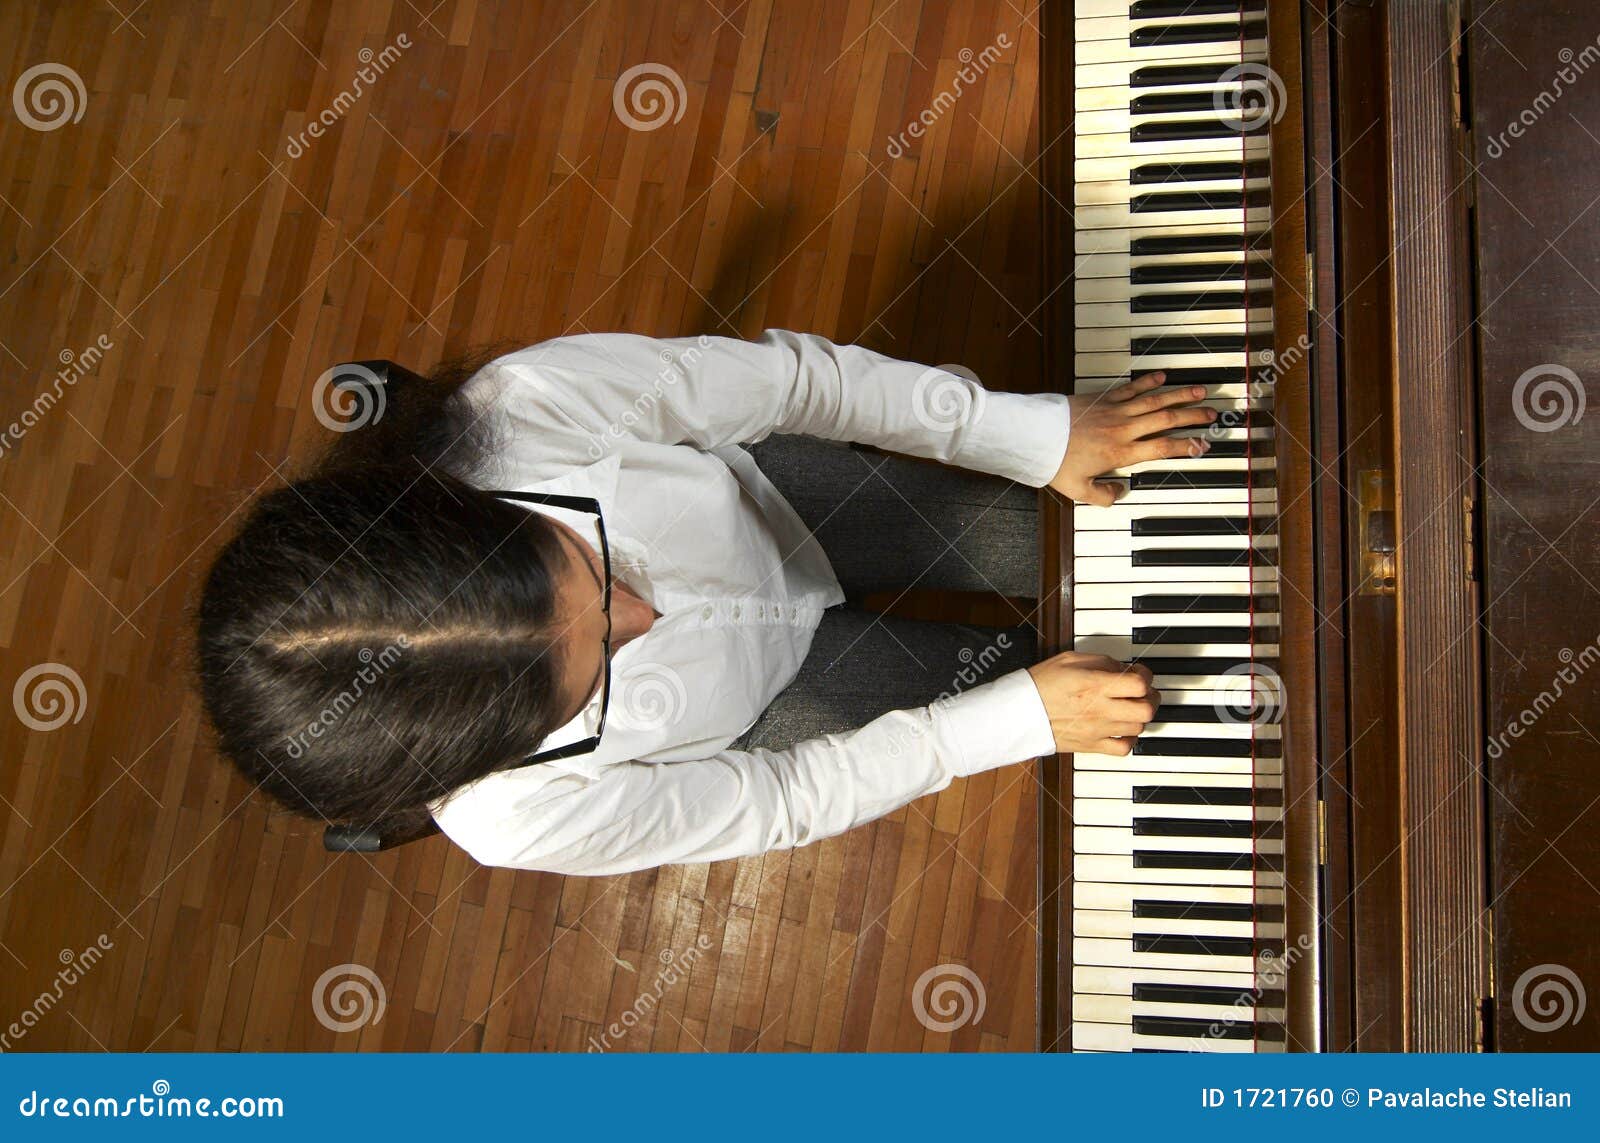 gifted pianist at the piano-6